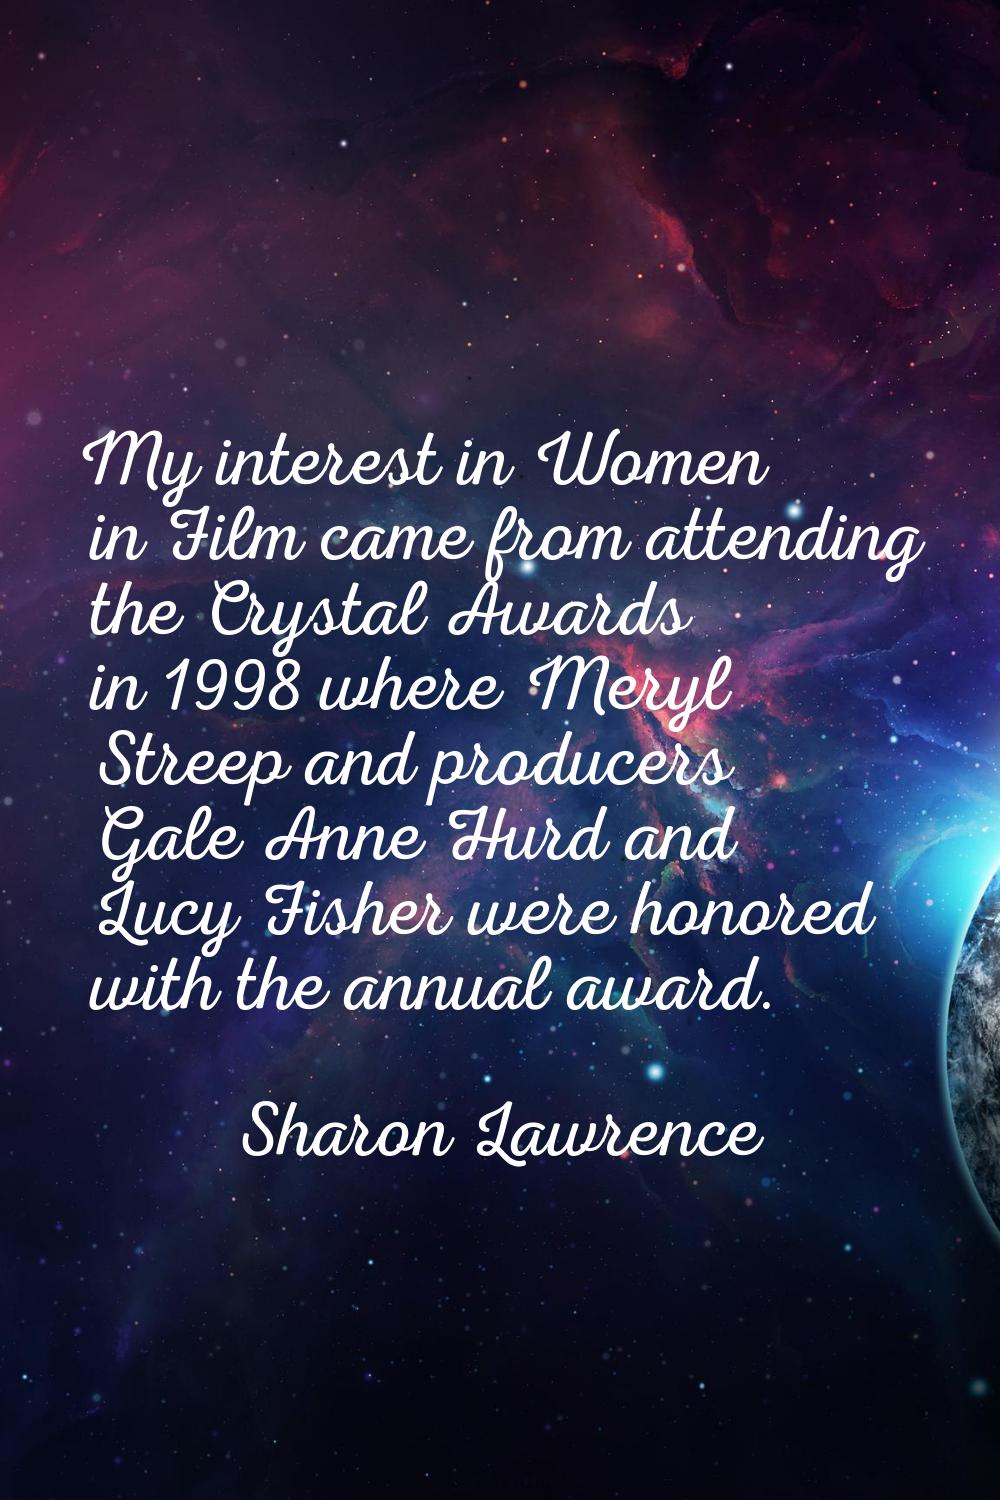 My interest in Women in Film came from attending the Crystal Awards in 1998 where Meryl Streep and 